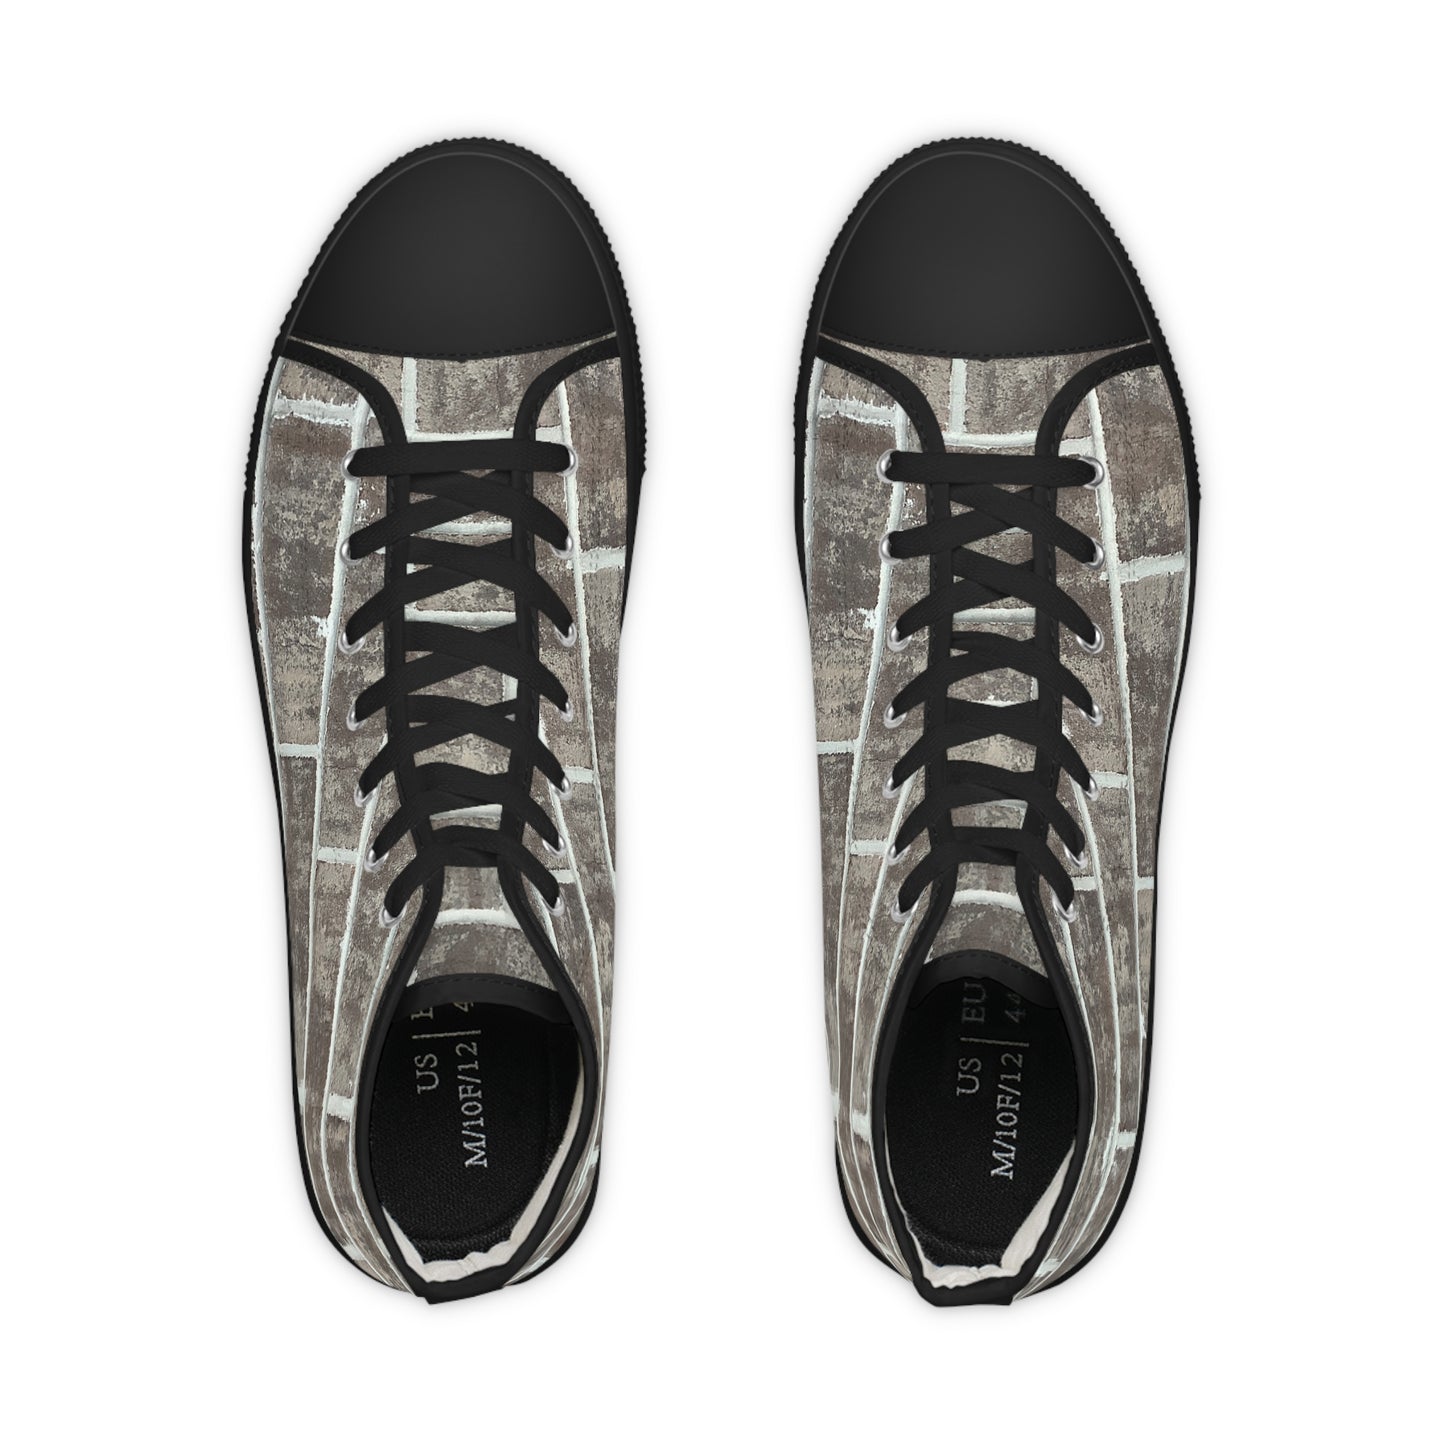 Limited Edition High Top Sneakers - Bushed